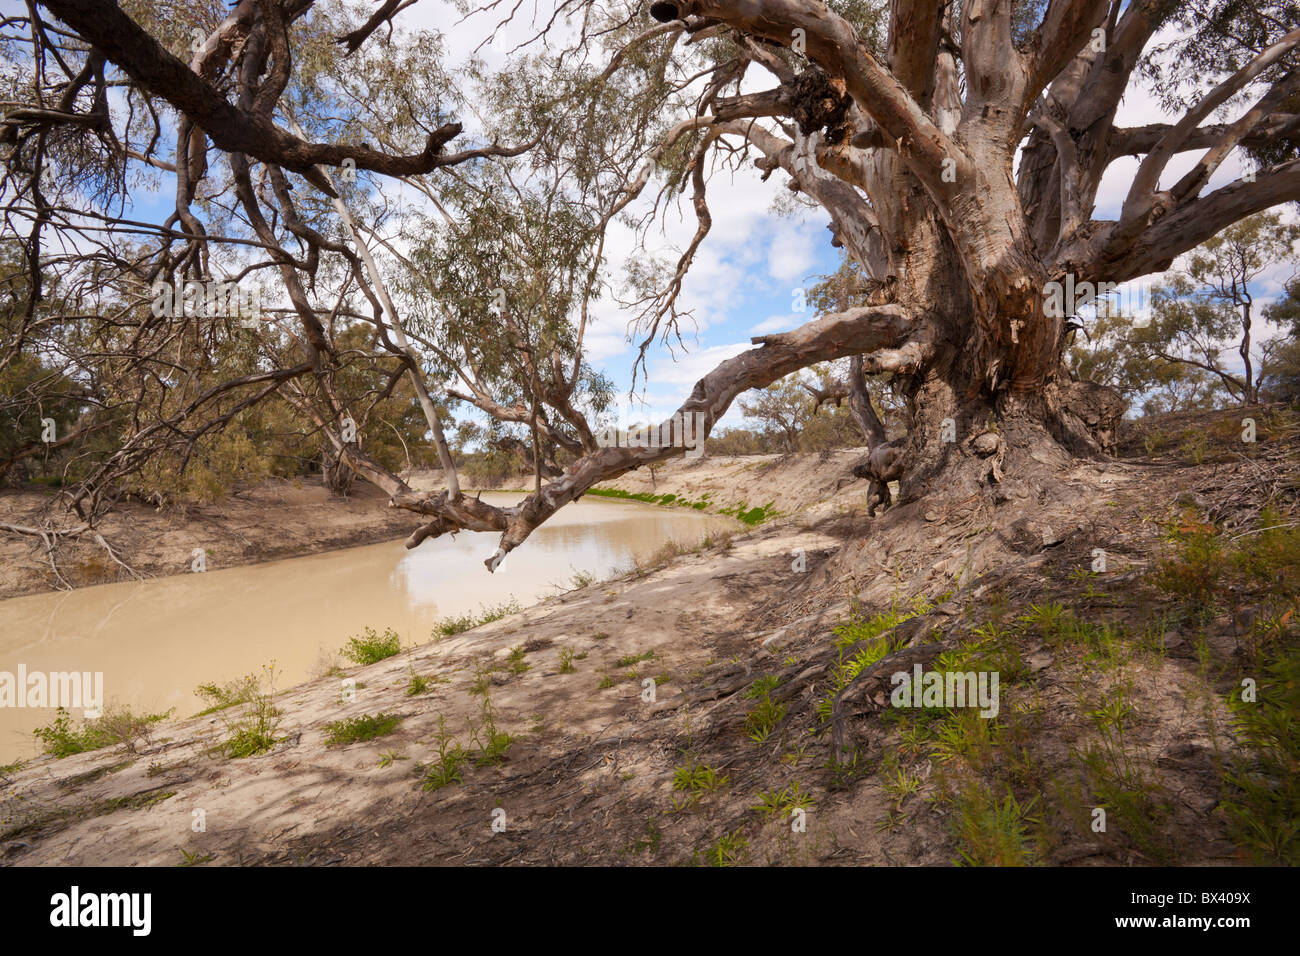 An old, gnarled River Red Gum on the banks of the Darling River, Kinchega National Park, Menindee, Broken Hill, New South Wales Stock Photo